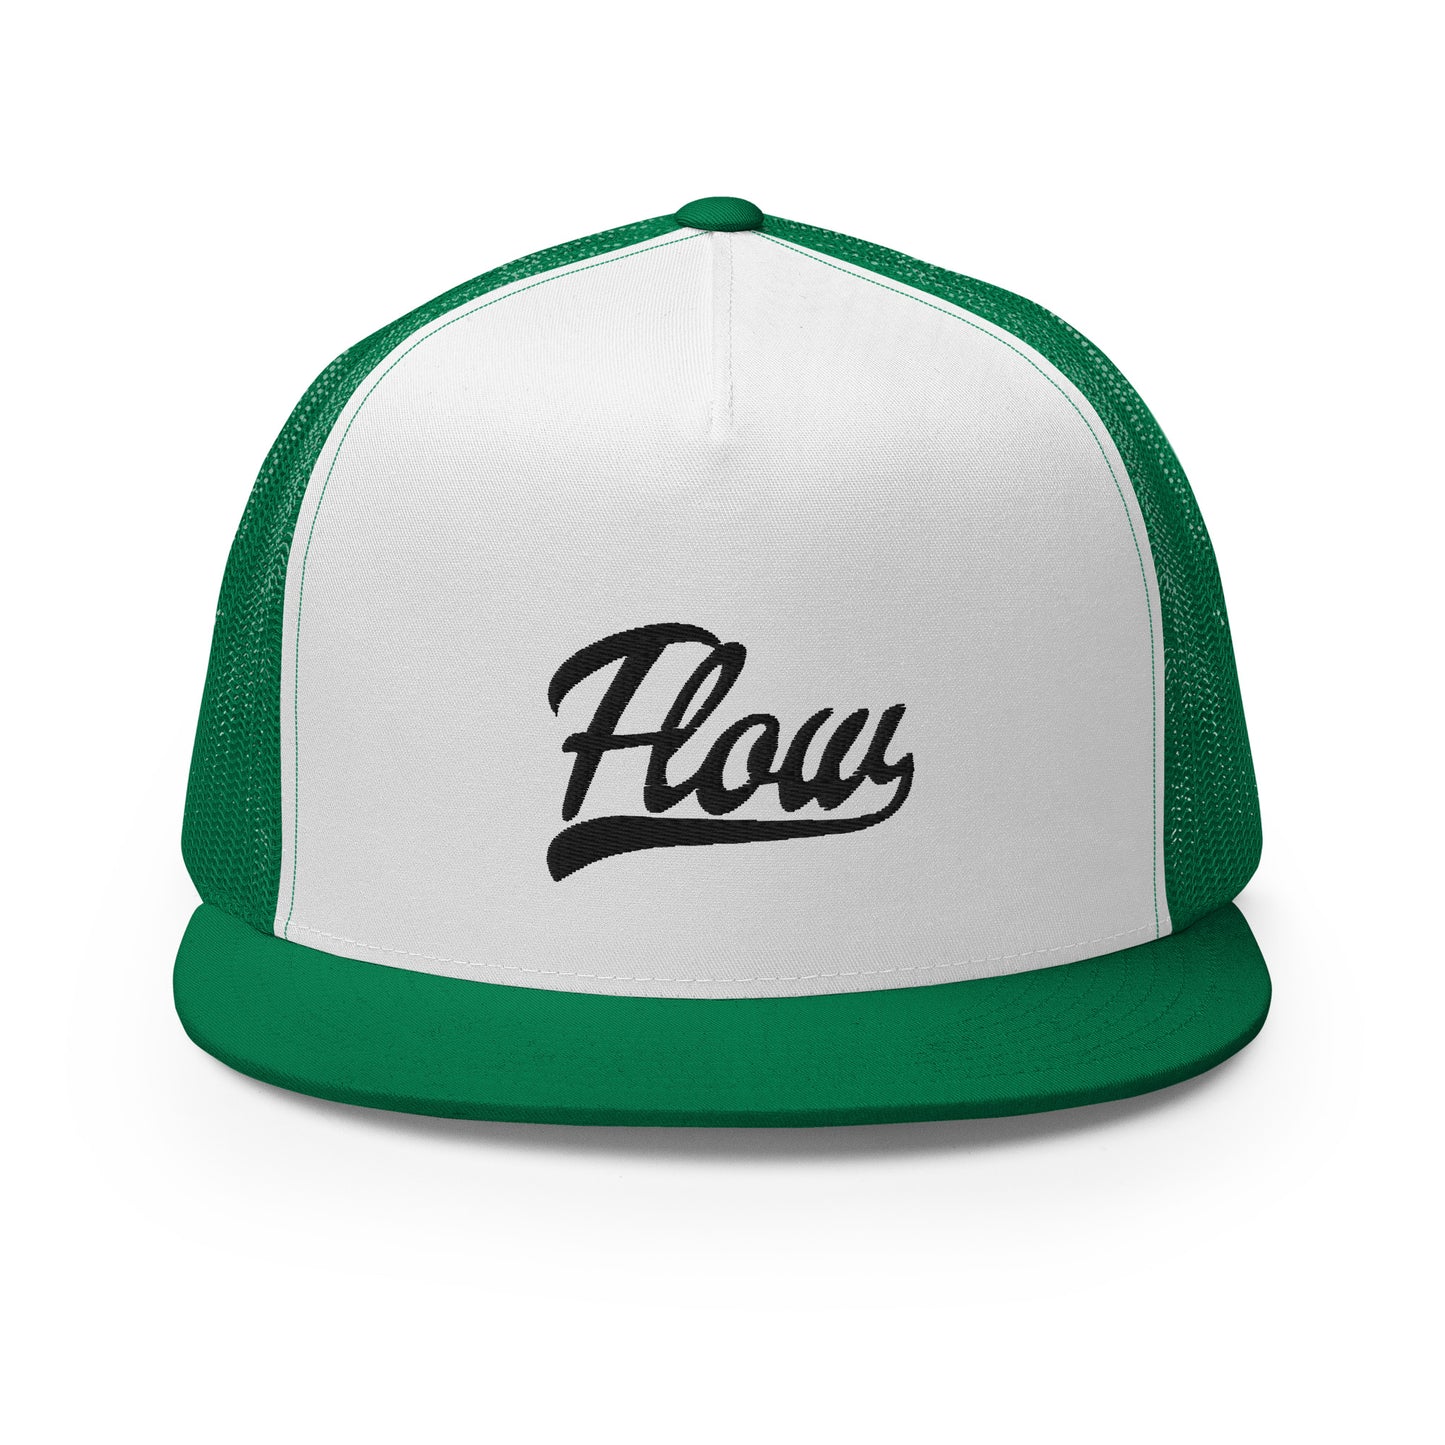 5-panel trucker hat, 4 back panels are kelly green, front panel is white with the word 'Flow' embroidered on it.